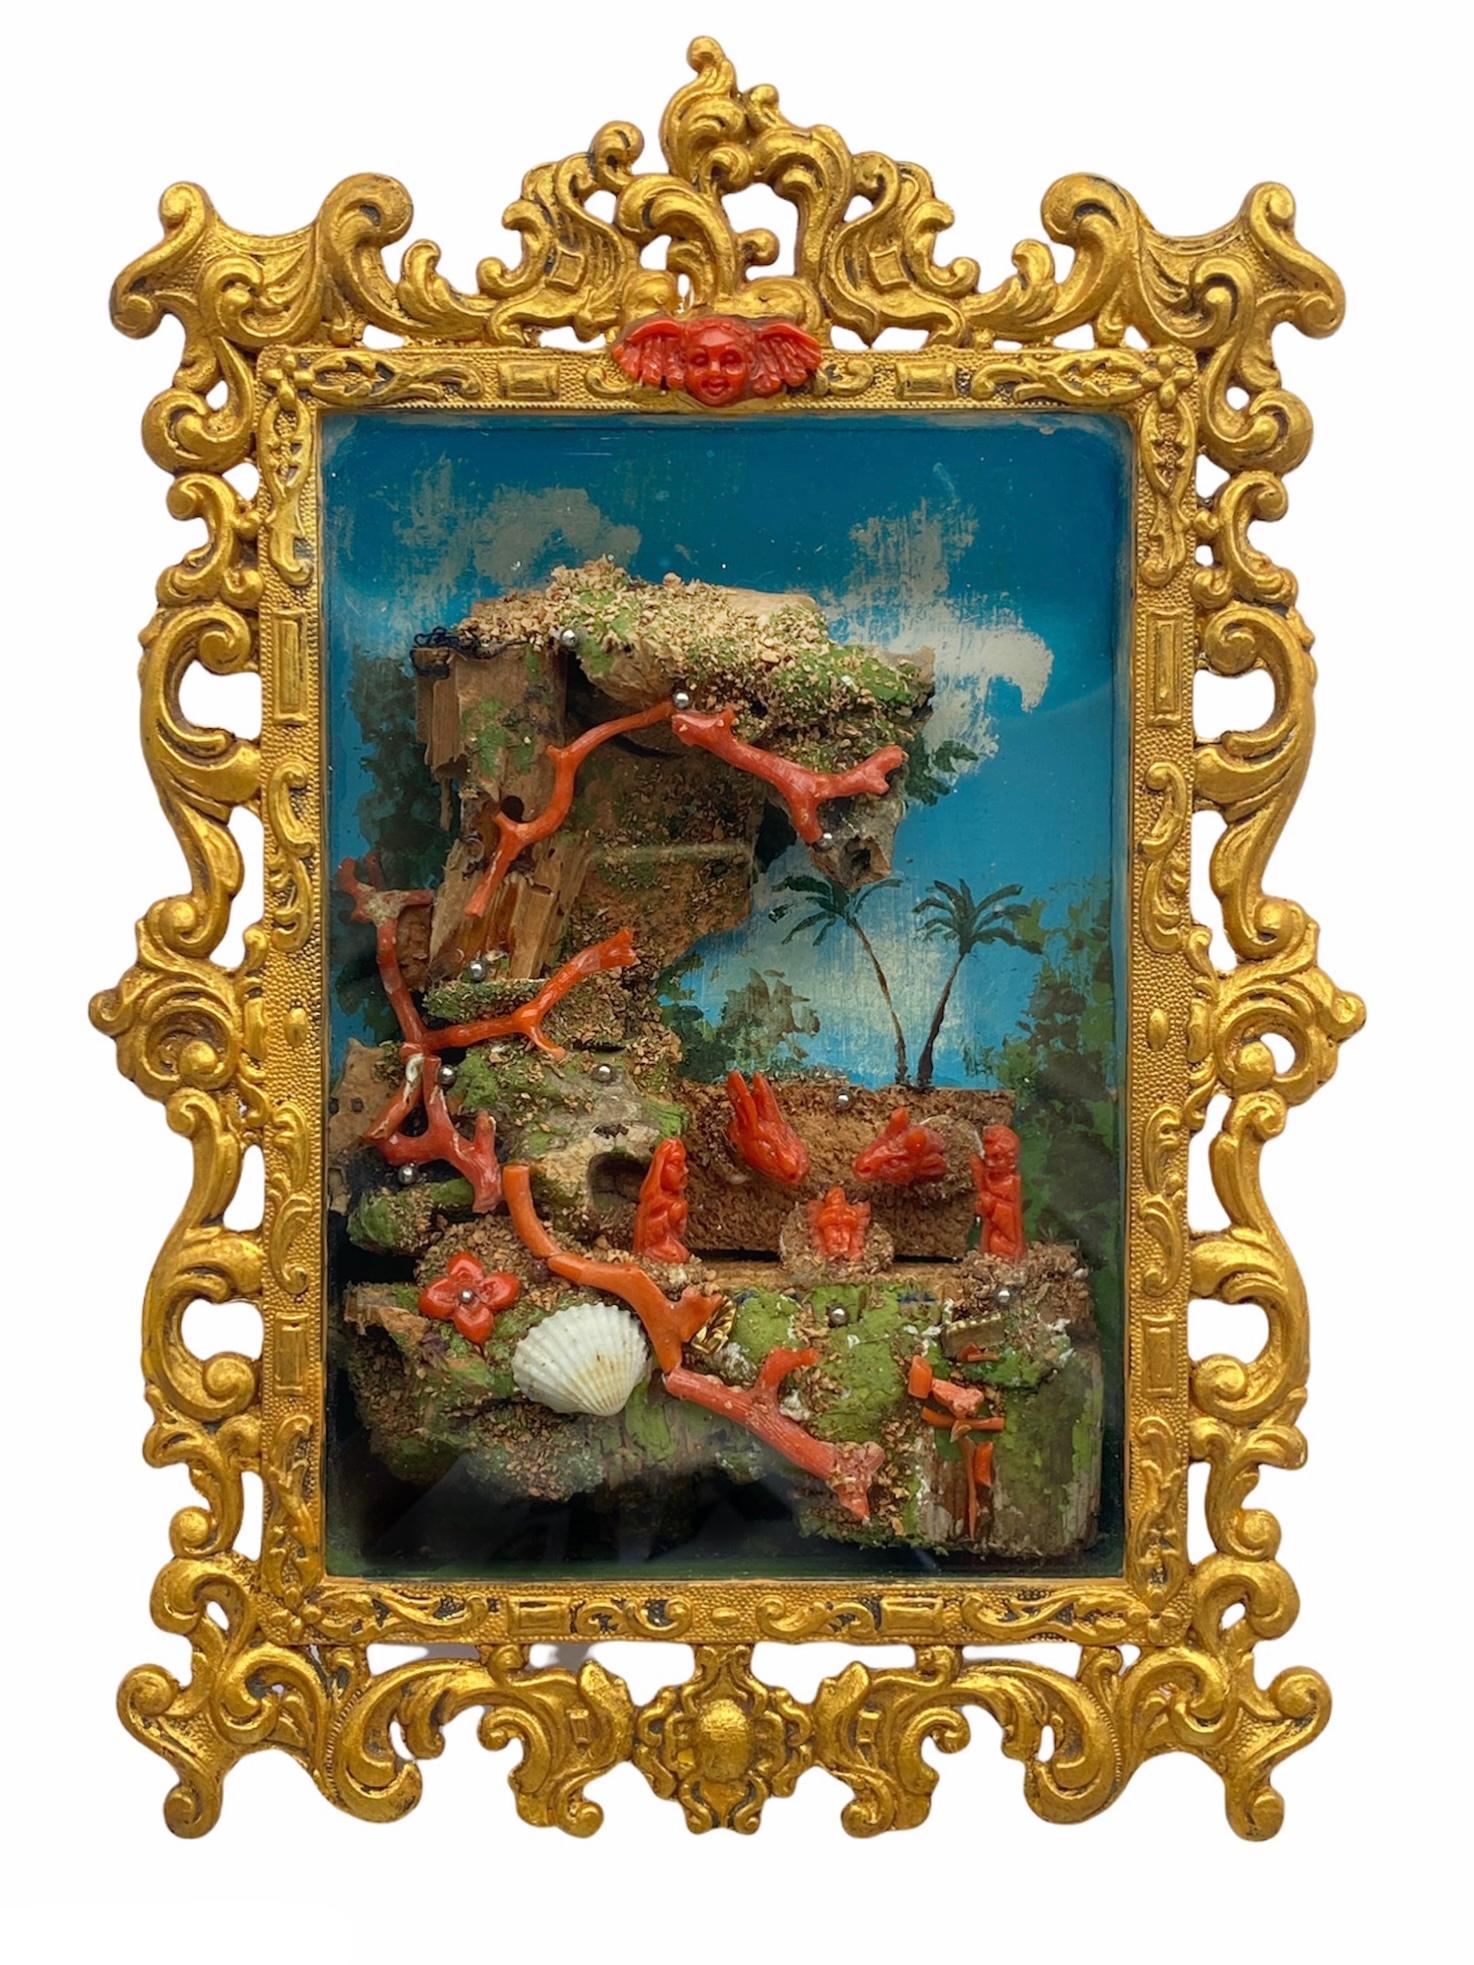 Christmas panel with Mediterranean coral characters .
The case is entirely made of hand painted wood .
The Nativity scene is handmade in Sicily from coral masters who made this real works of art from generations.

Also available in different